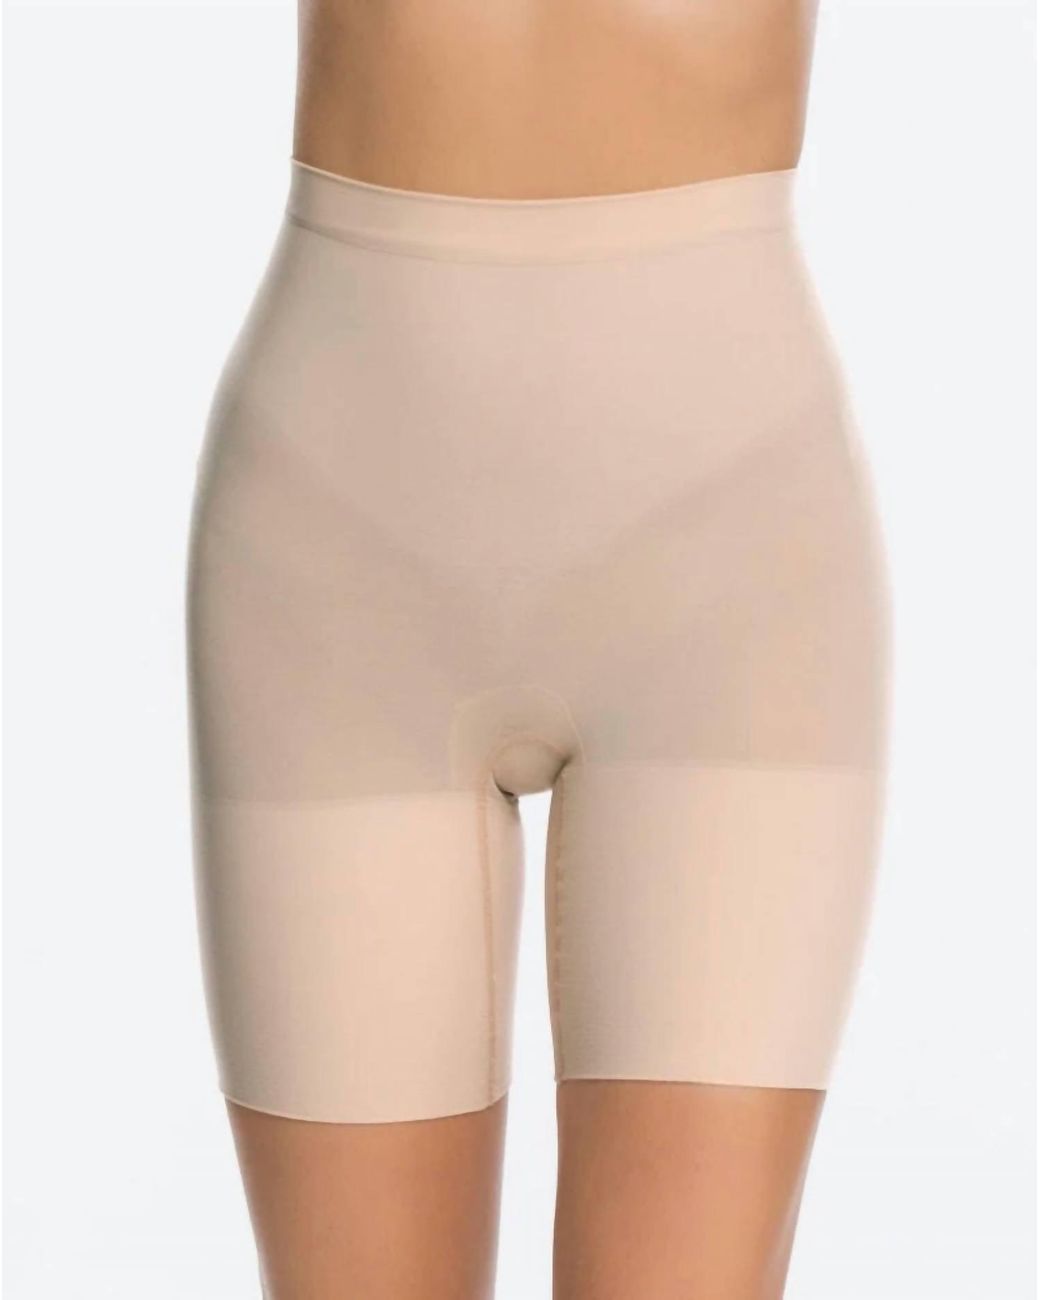 Spanx Power Short In Soft Nude in Natural